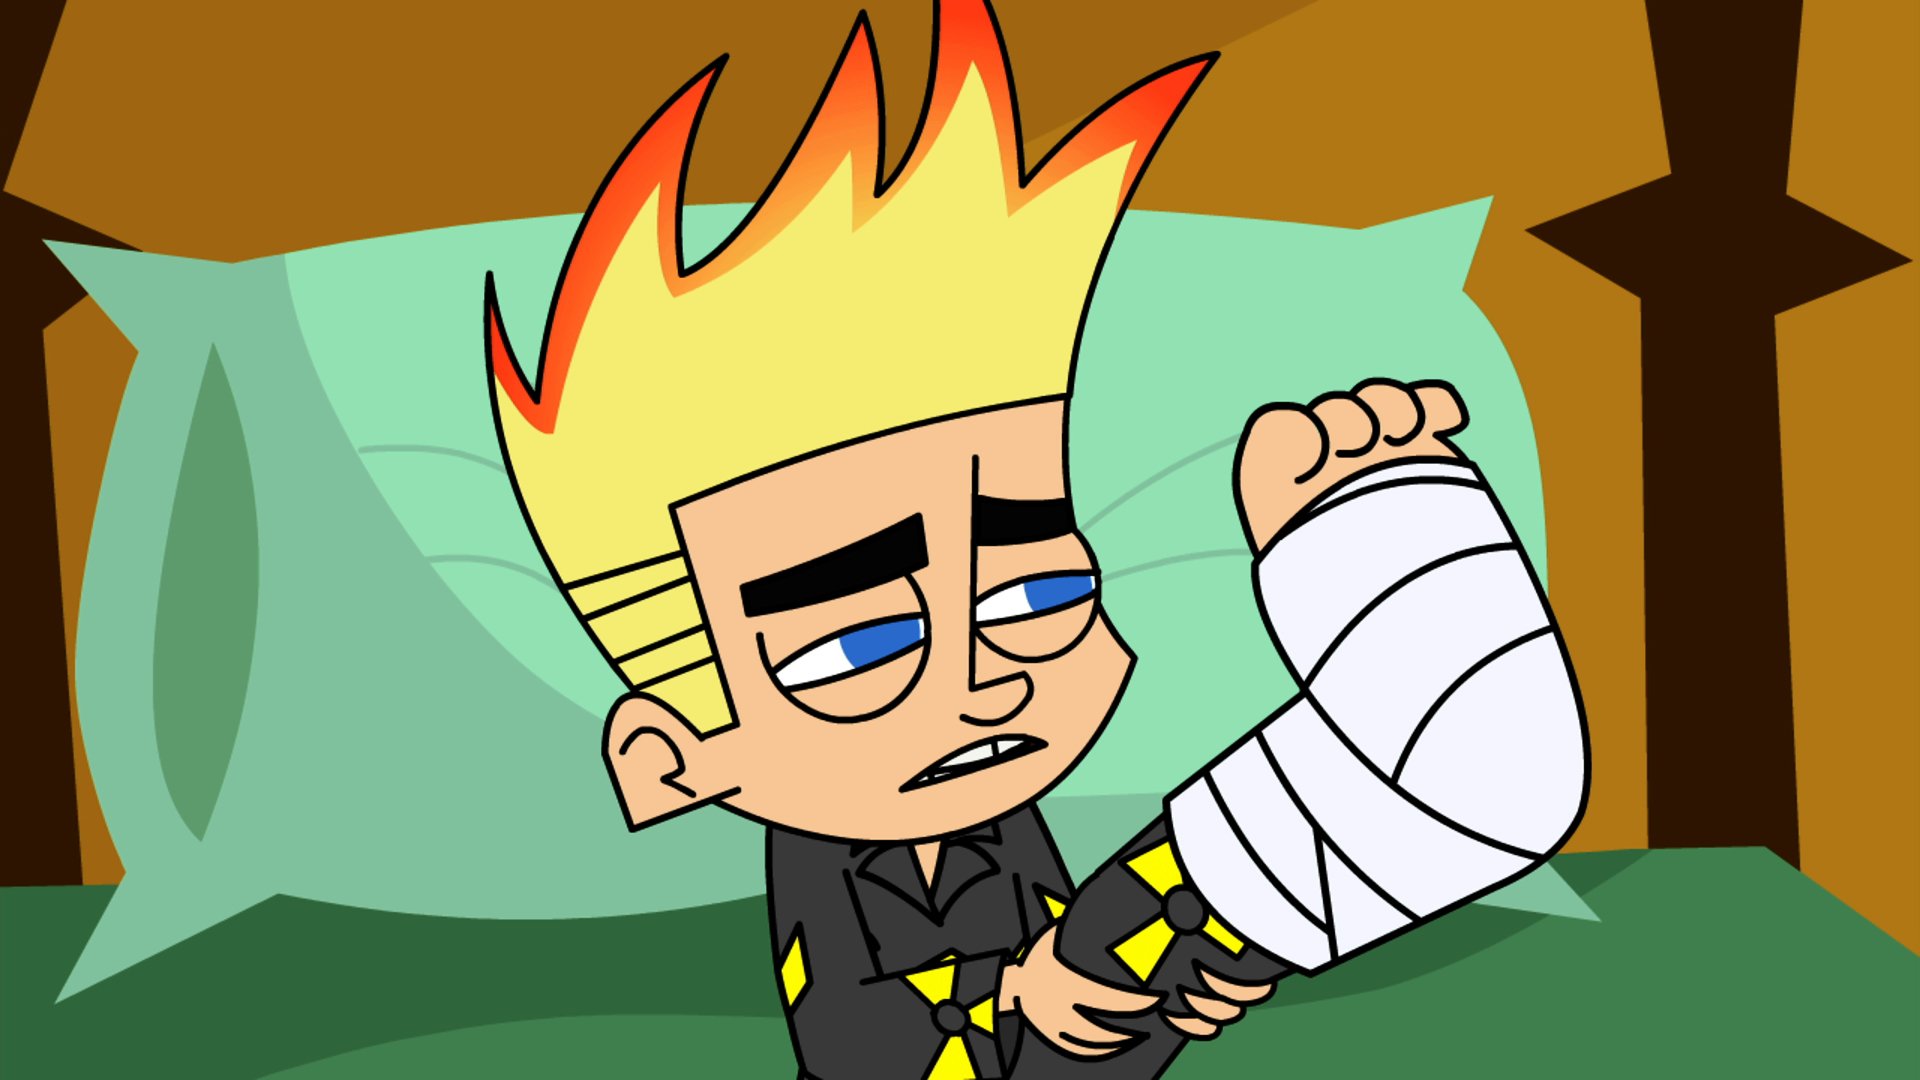 Johnny test hate art - 🧡 An Episode of Johnny Test but Every Whipcrack mak...